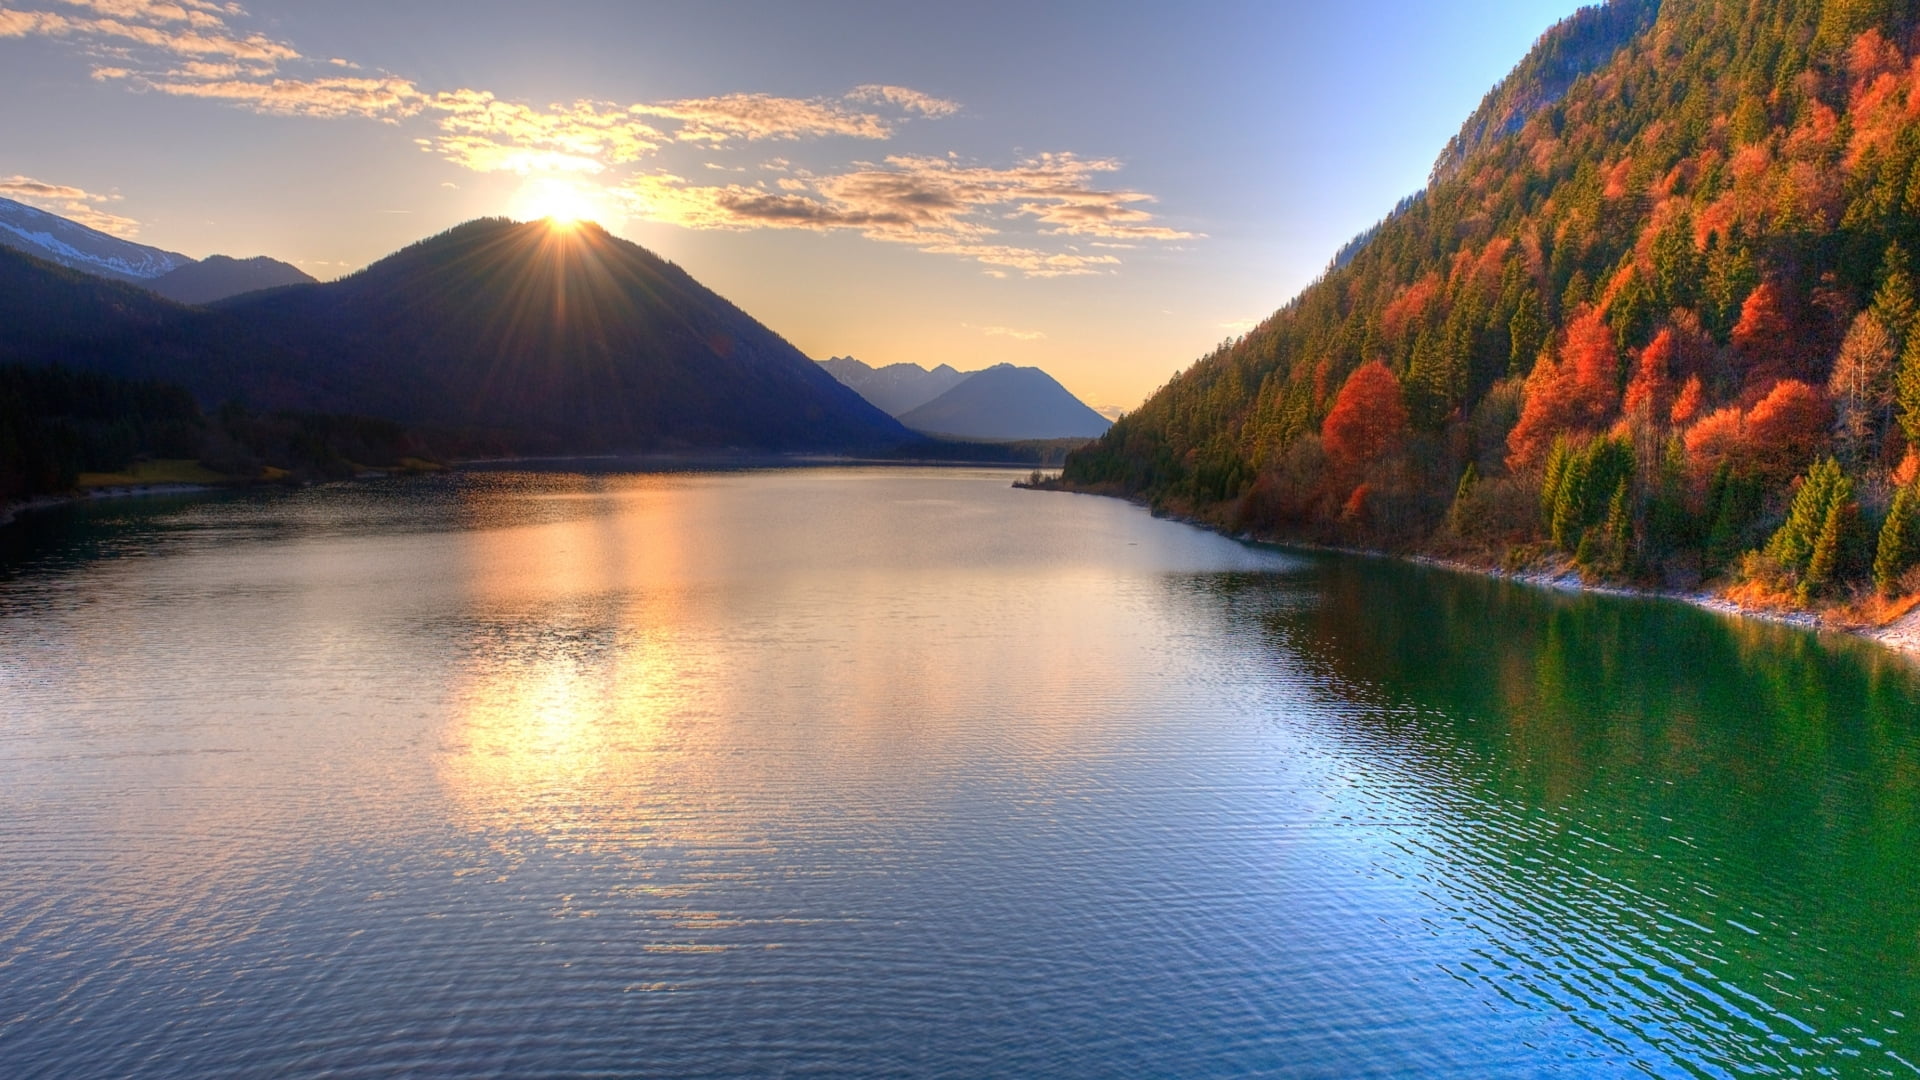 Landscape photography of mountain near body of water during daytime ...